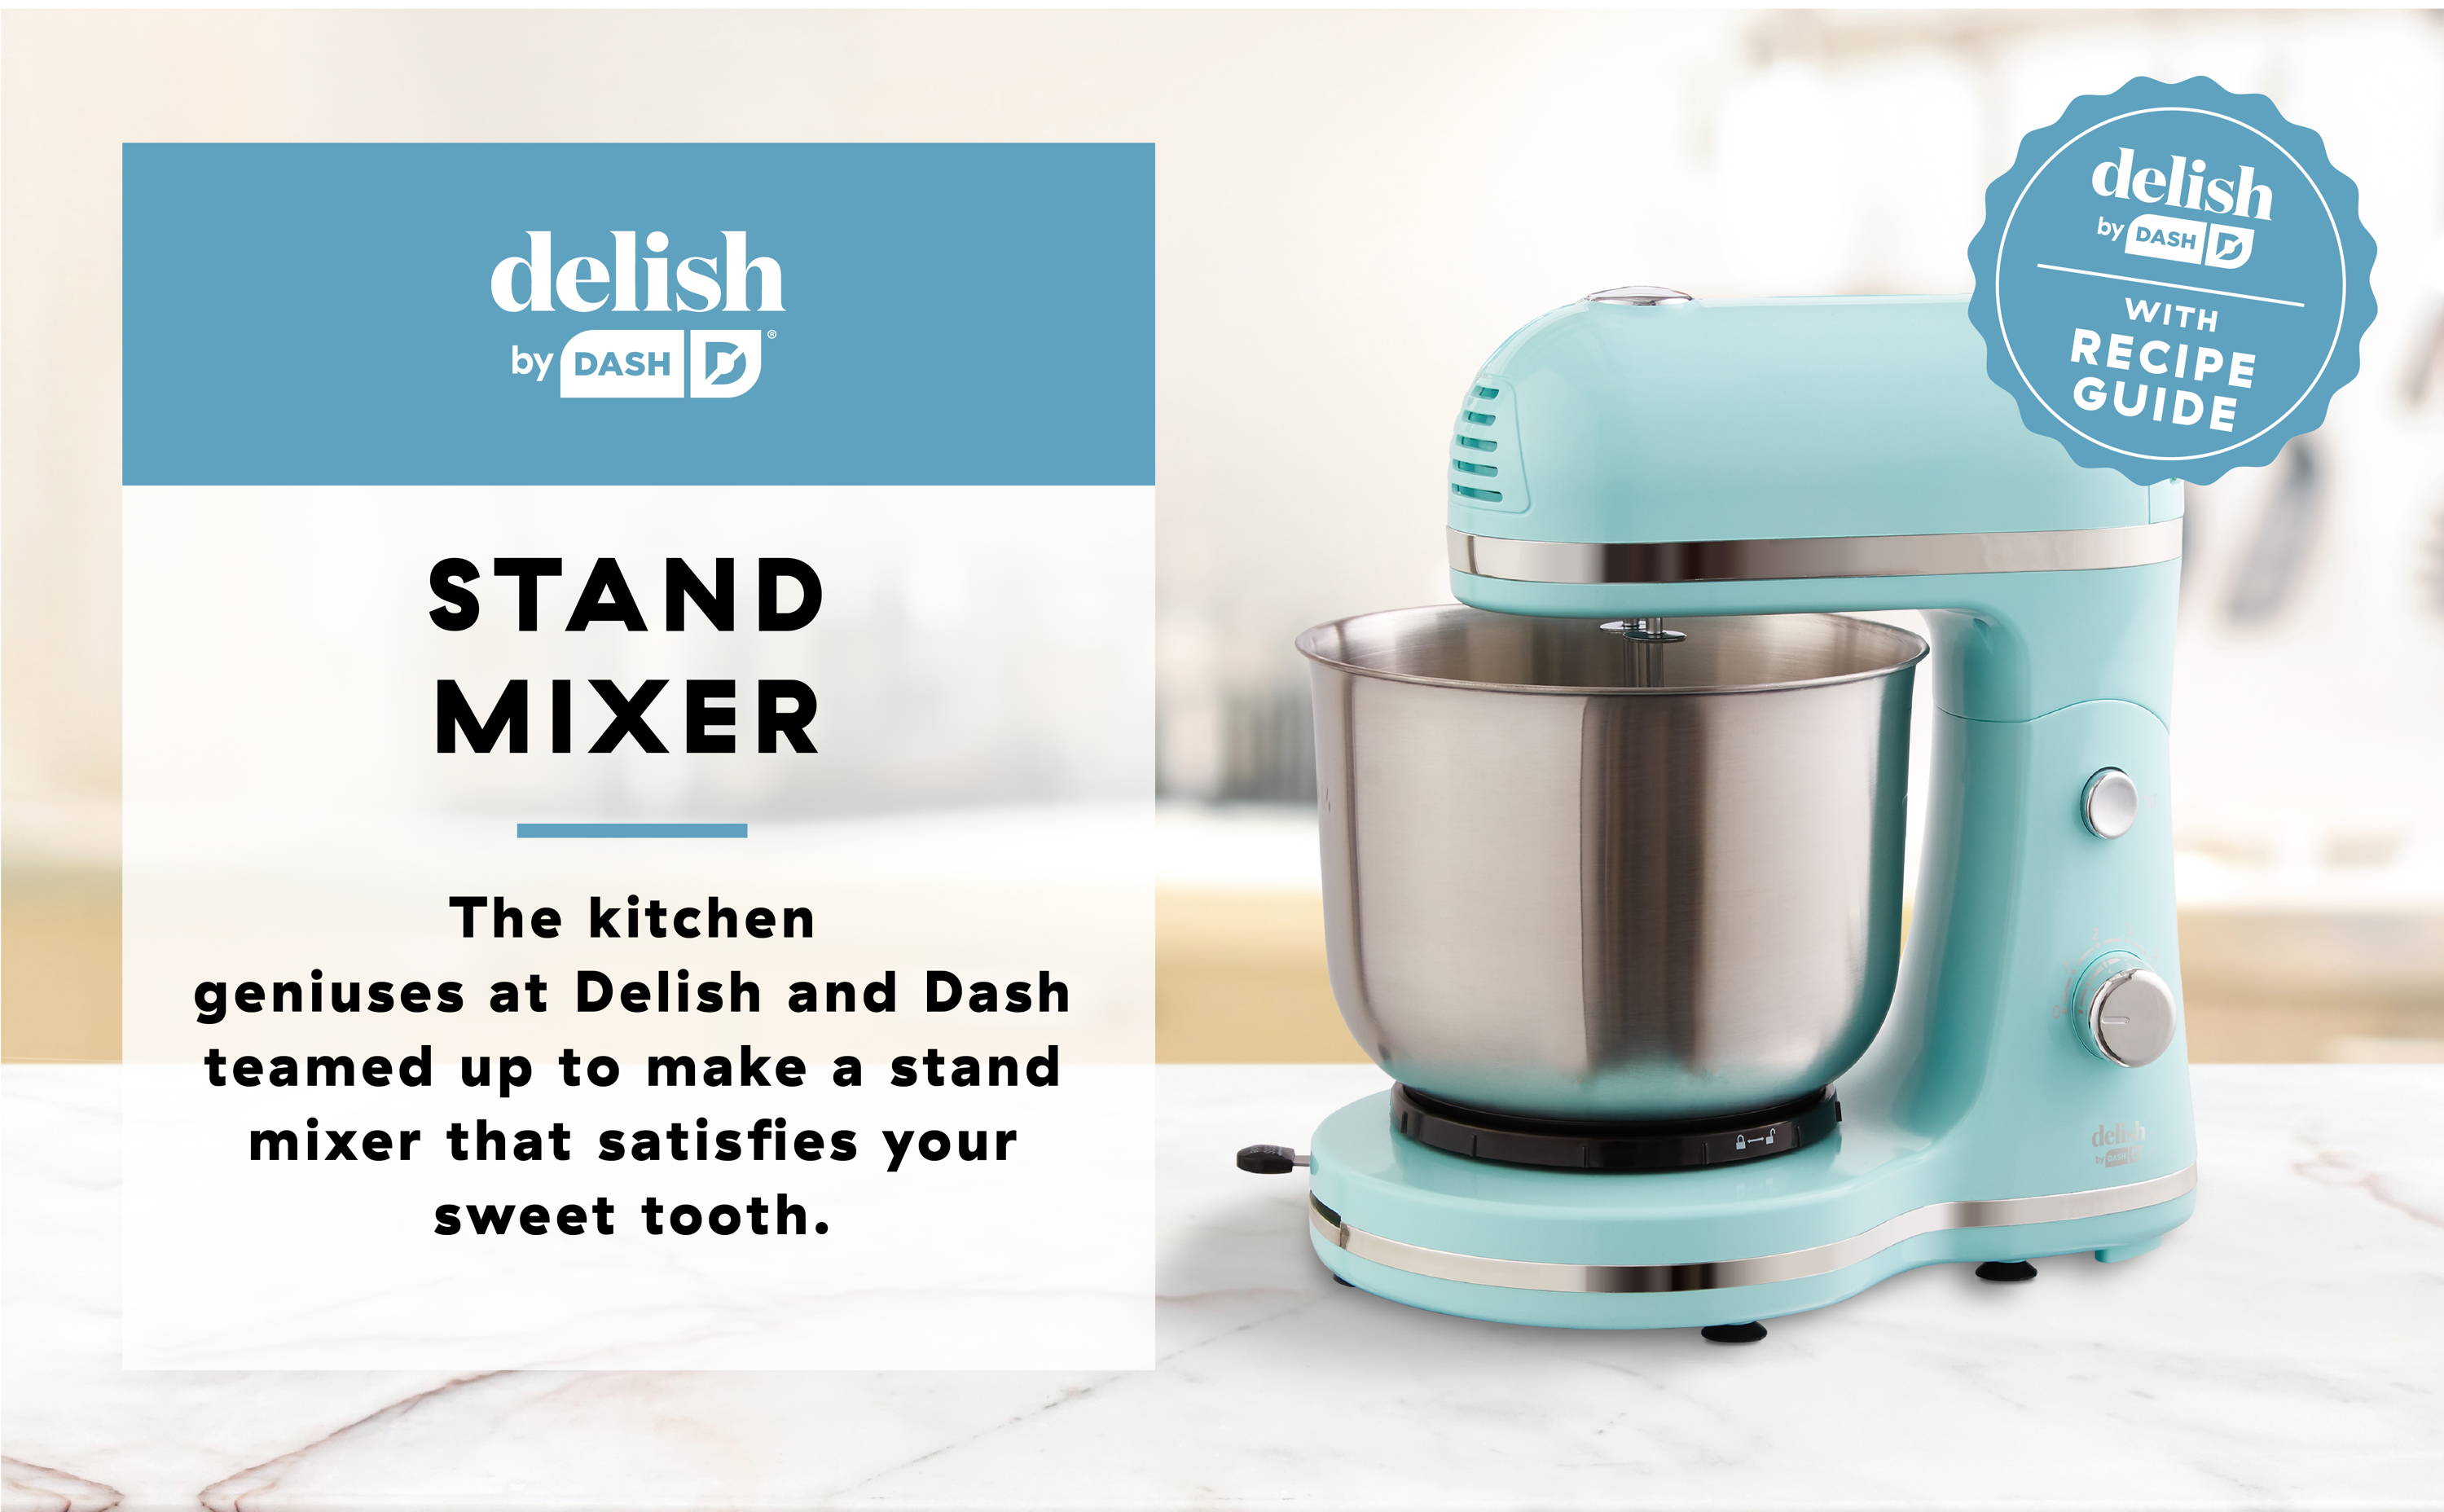 Stand Mixer. The Kitchen geniuses at Delish and Dash teamed up to make a stand mixer that satisfies your sweet tooth. 